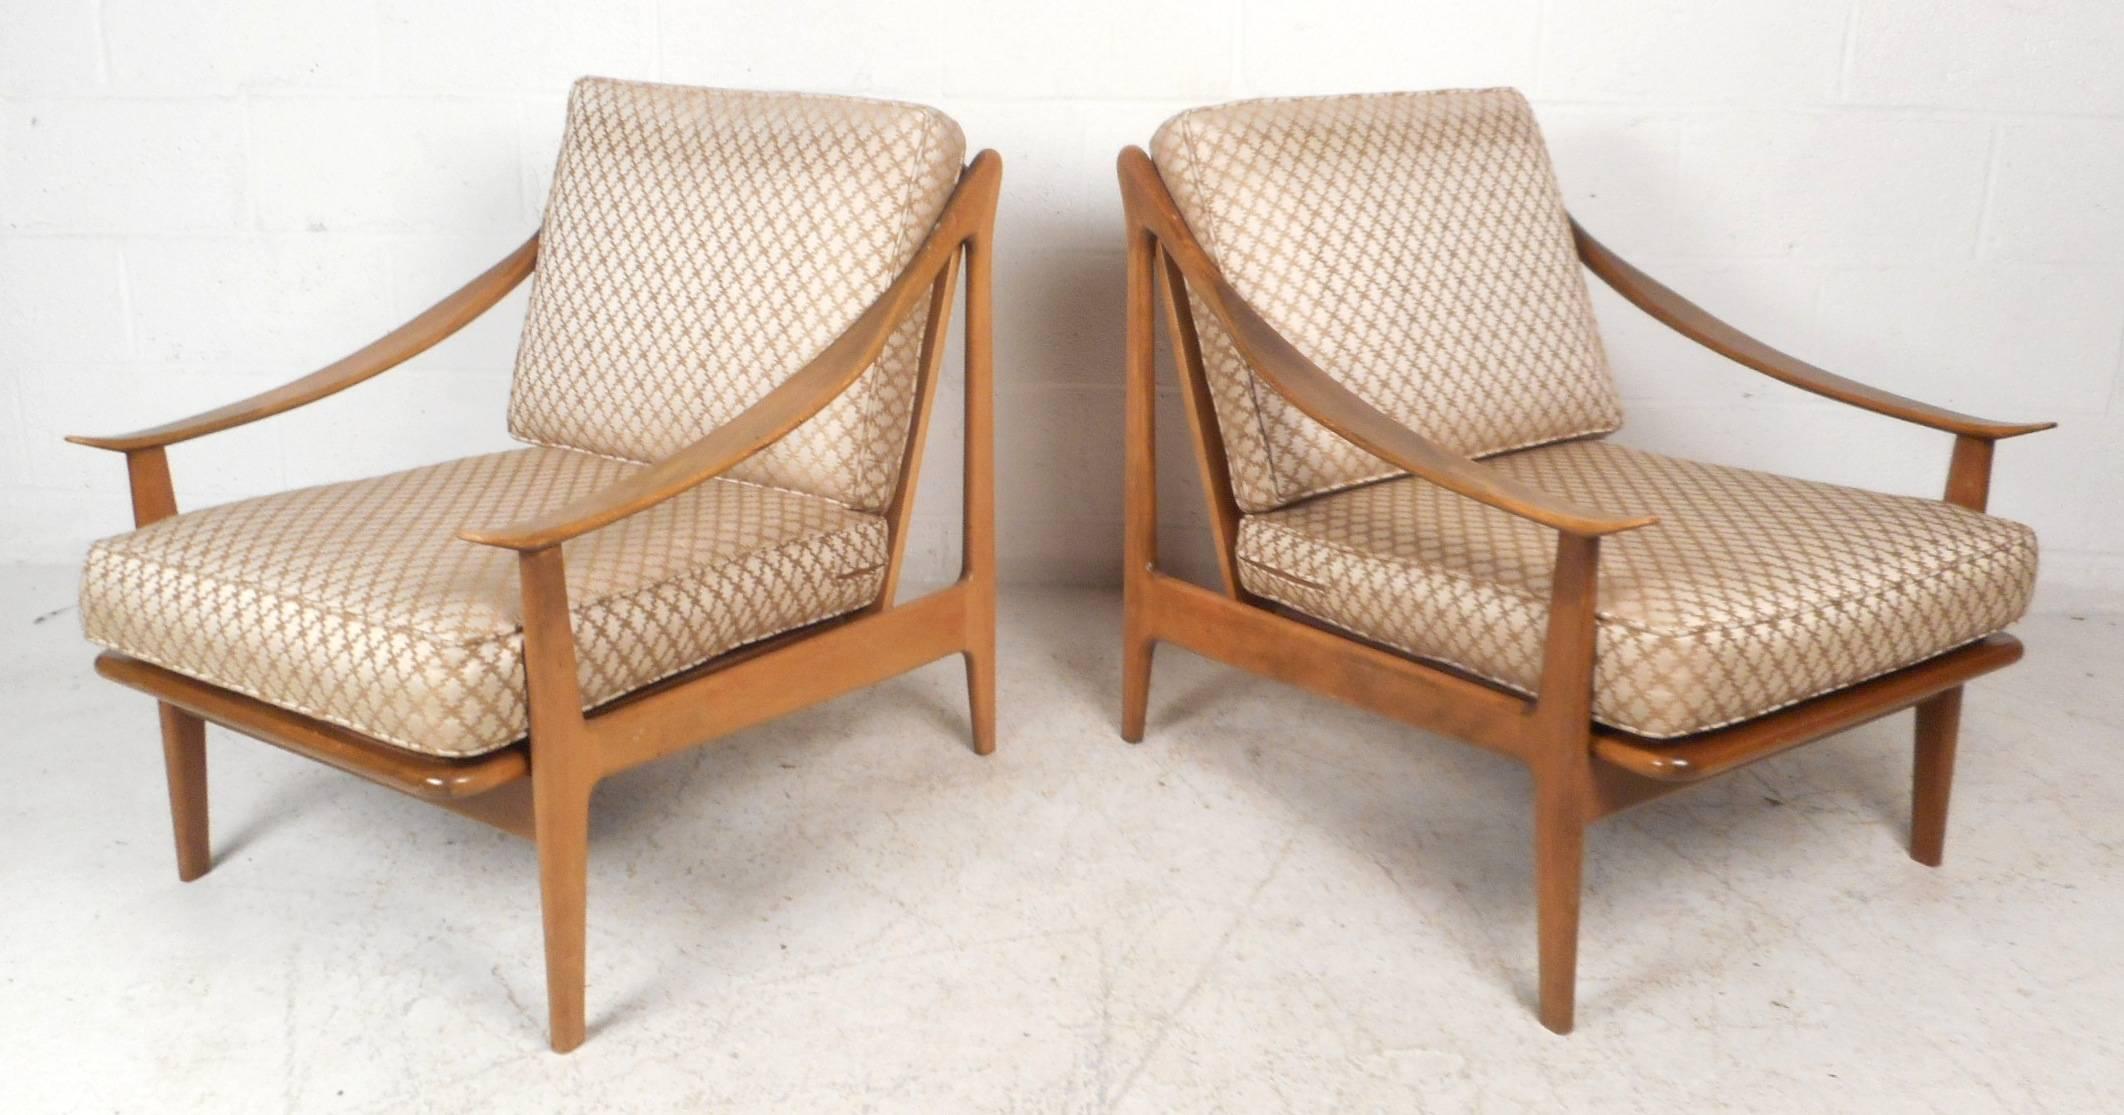 Stunning pair of vintage modern lounge chairs with unusual sculpted arm rests that abruptly slope from the backrest and arch back up at the end. Sleek design with gorgeous wood grain, a spindle backrest, and a sturdy frame. Comfortable Mid-Century